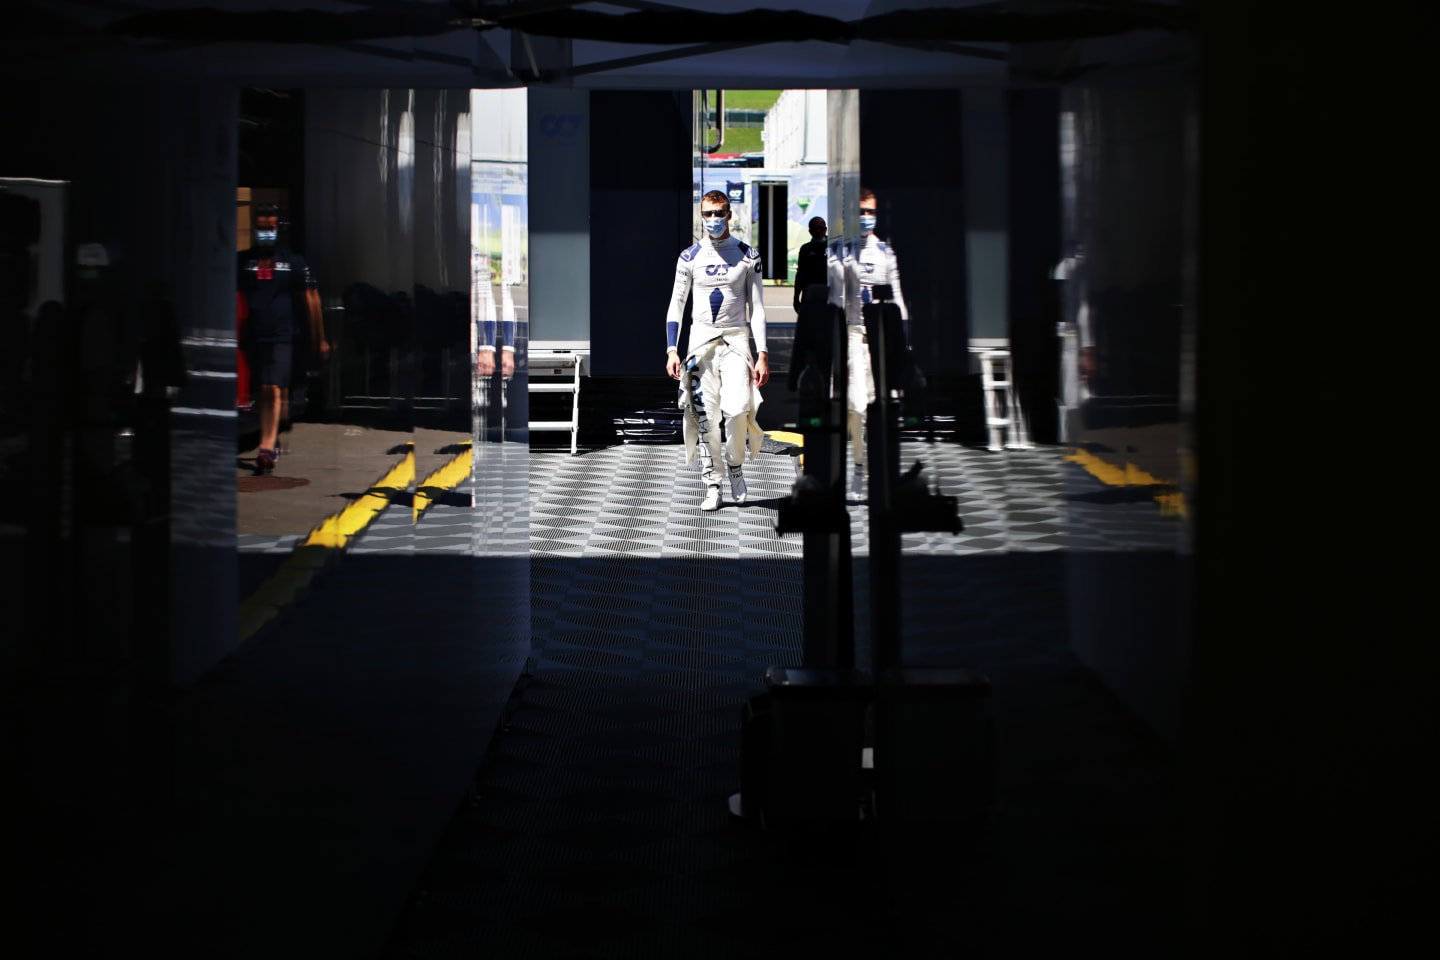 SPIELBERG, AUSTRIA - JULY 05: Daniil Kvyat of Russia and Scuderia AlphaTauri walks to the garage before the Formula One Grand Prix of Austria at Red Bull Ring on July 05, 2020 in Spielberg, Austria. (Photo by Peter Fox/Getty Images)